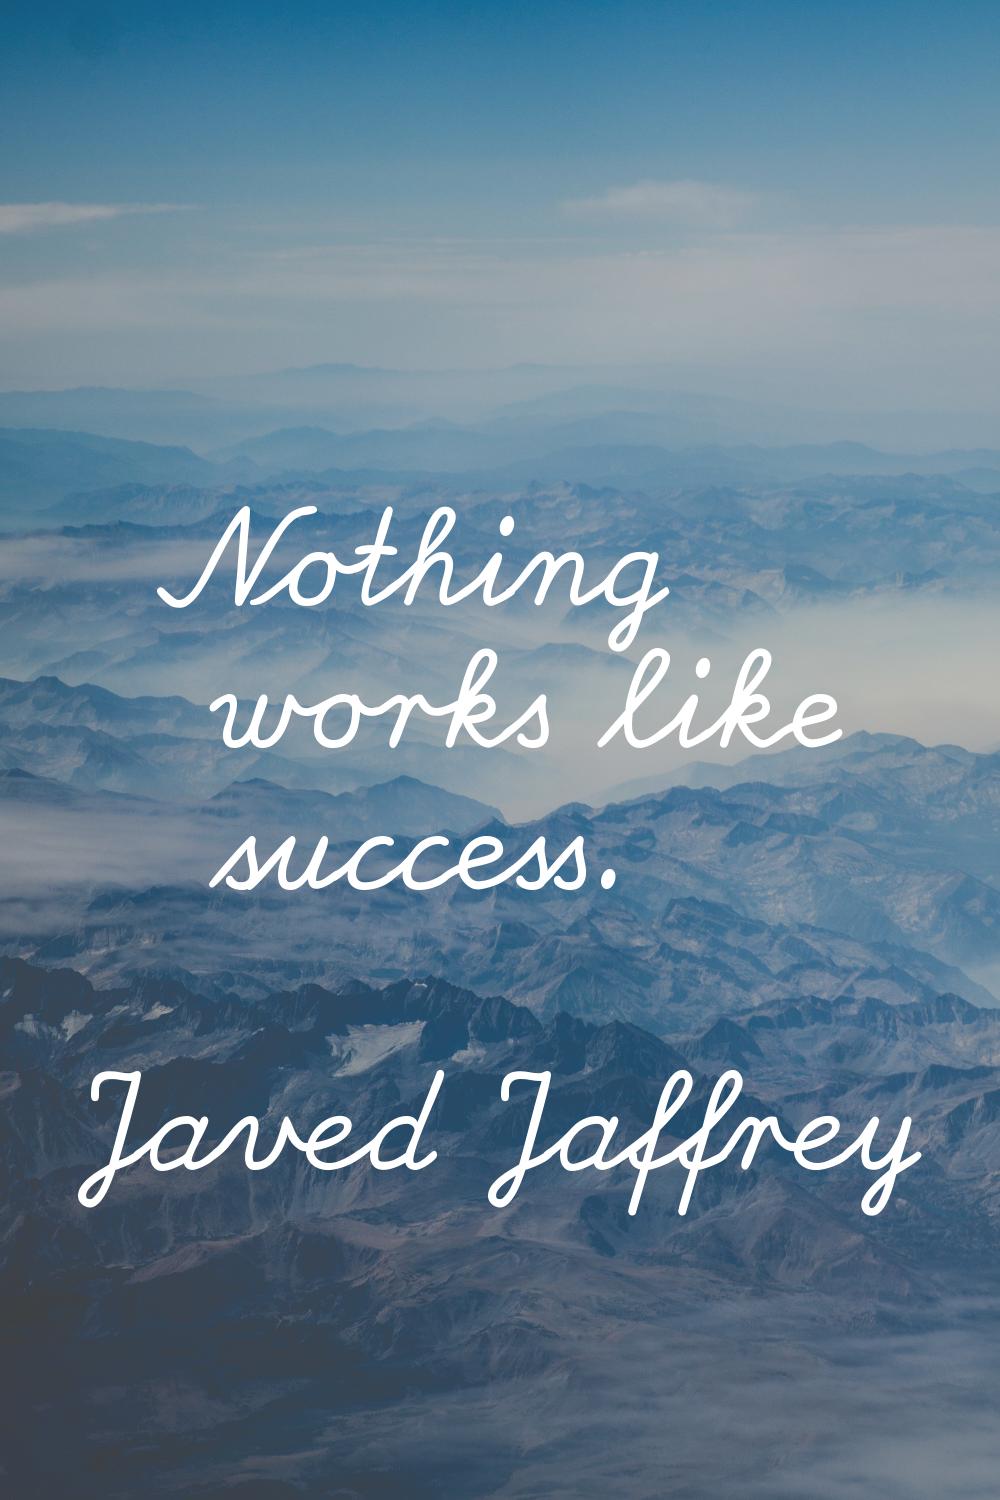 Nothing works like success.